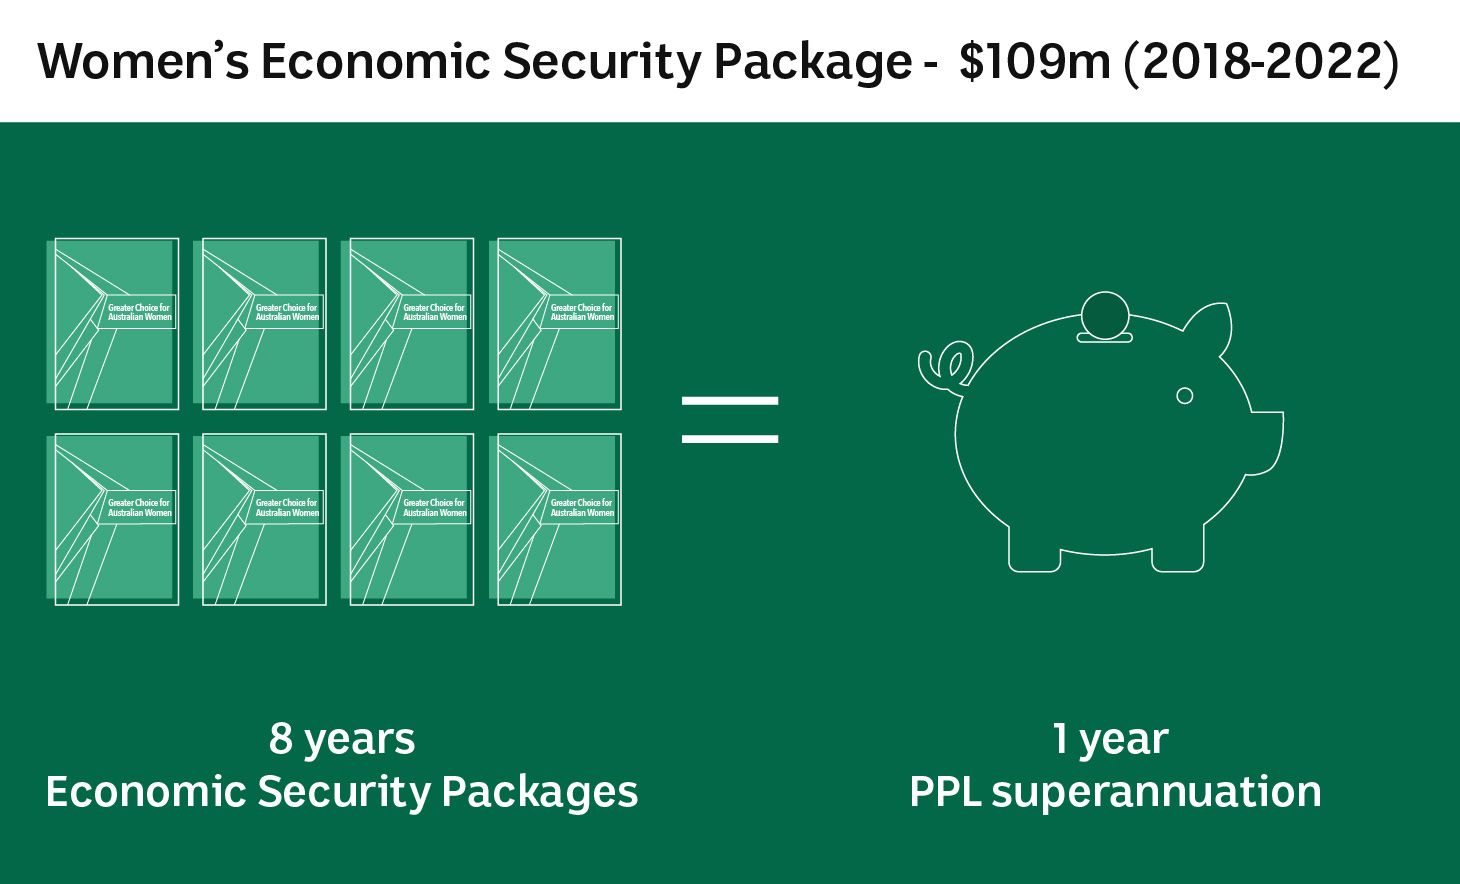 Illustration comparing how many women's security packages it would cost to fund one year of superannuation.